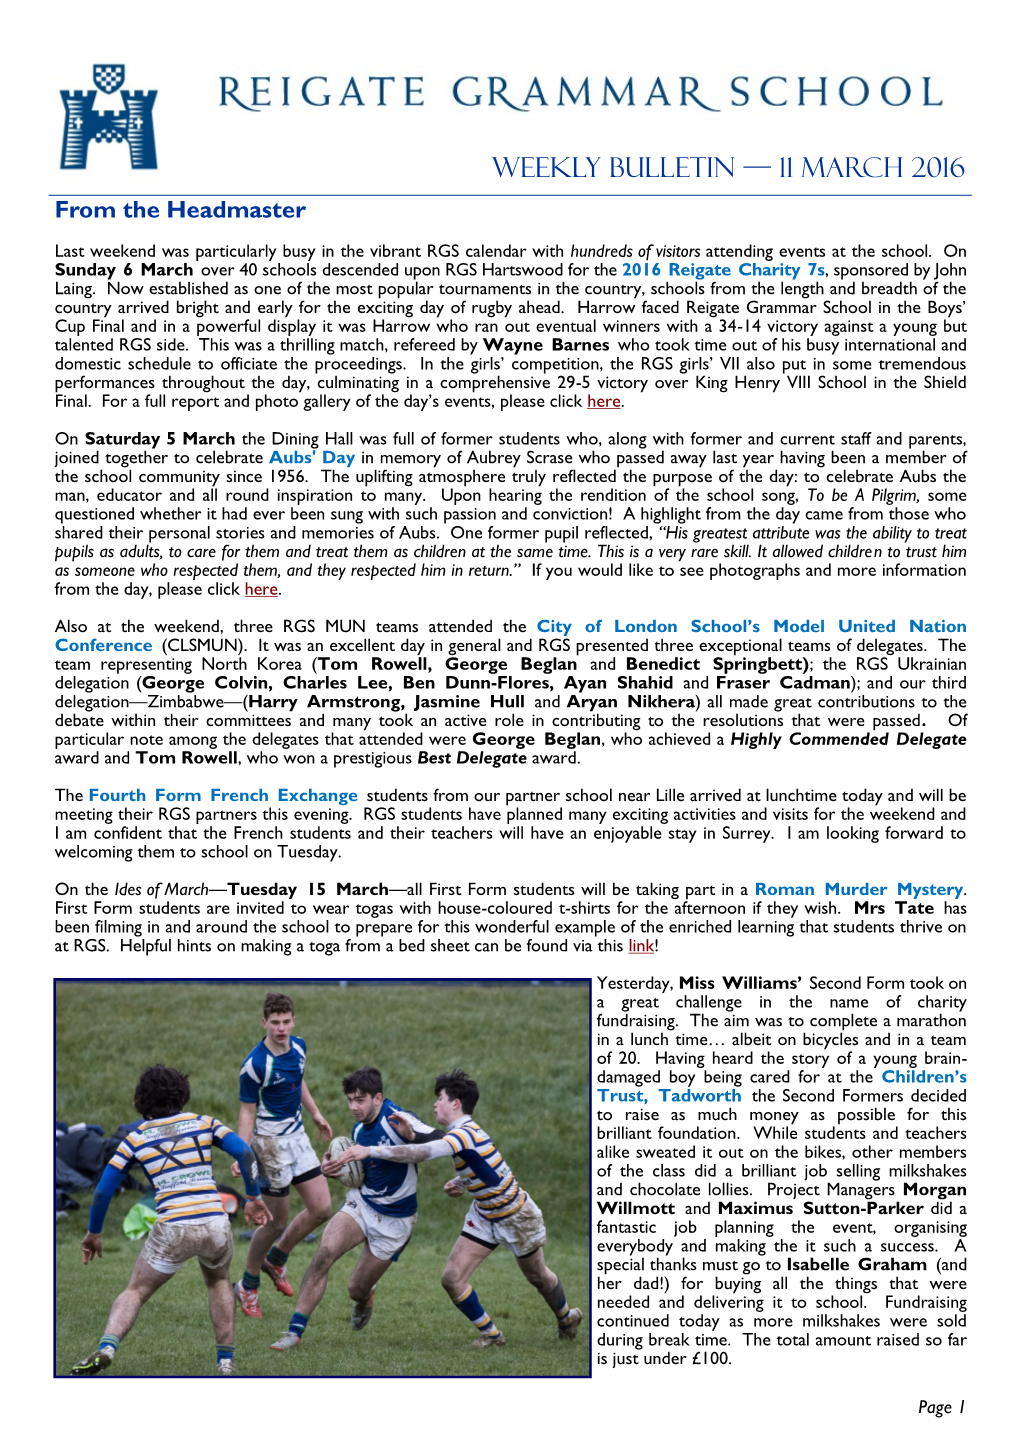 WEEKLY BULLETIN — 11 March 2016 from the Headmaster